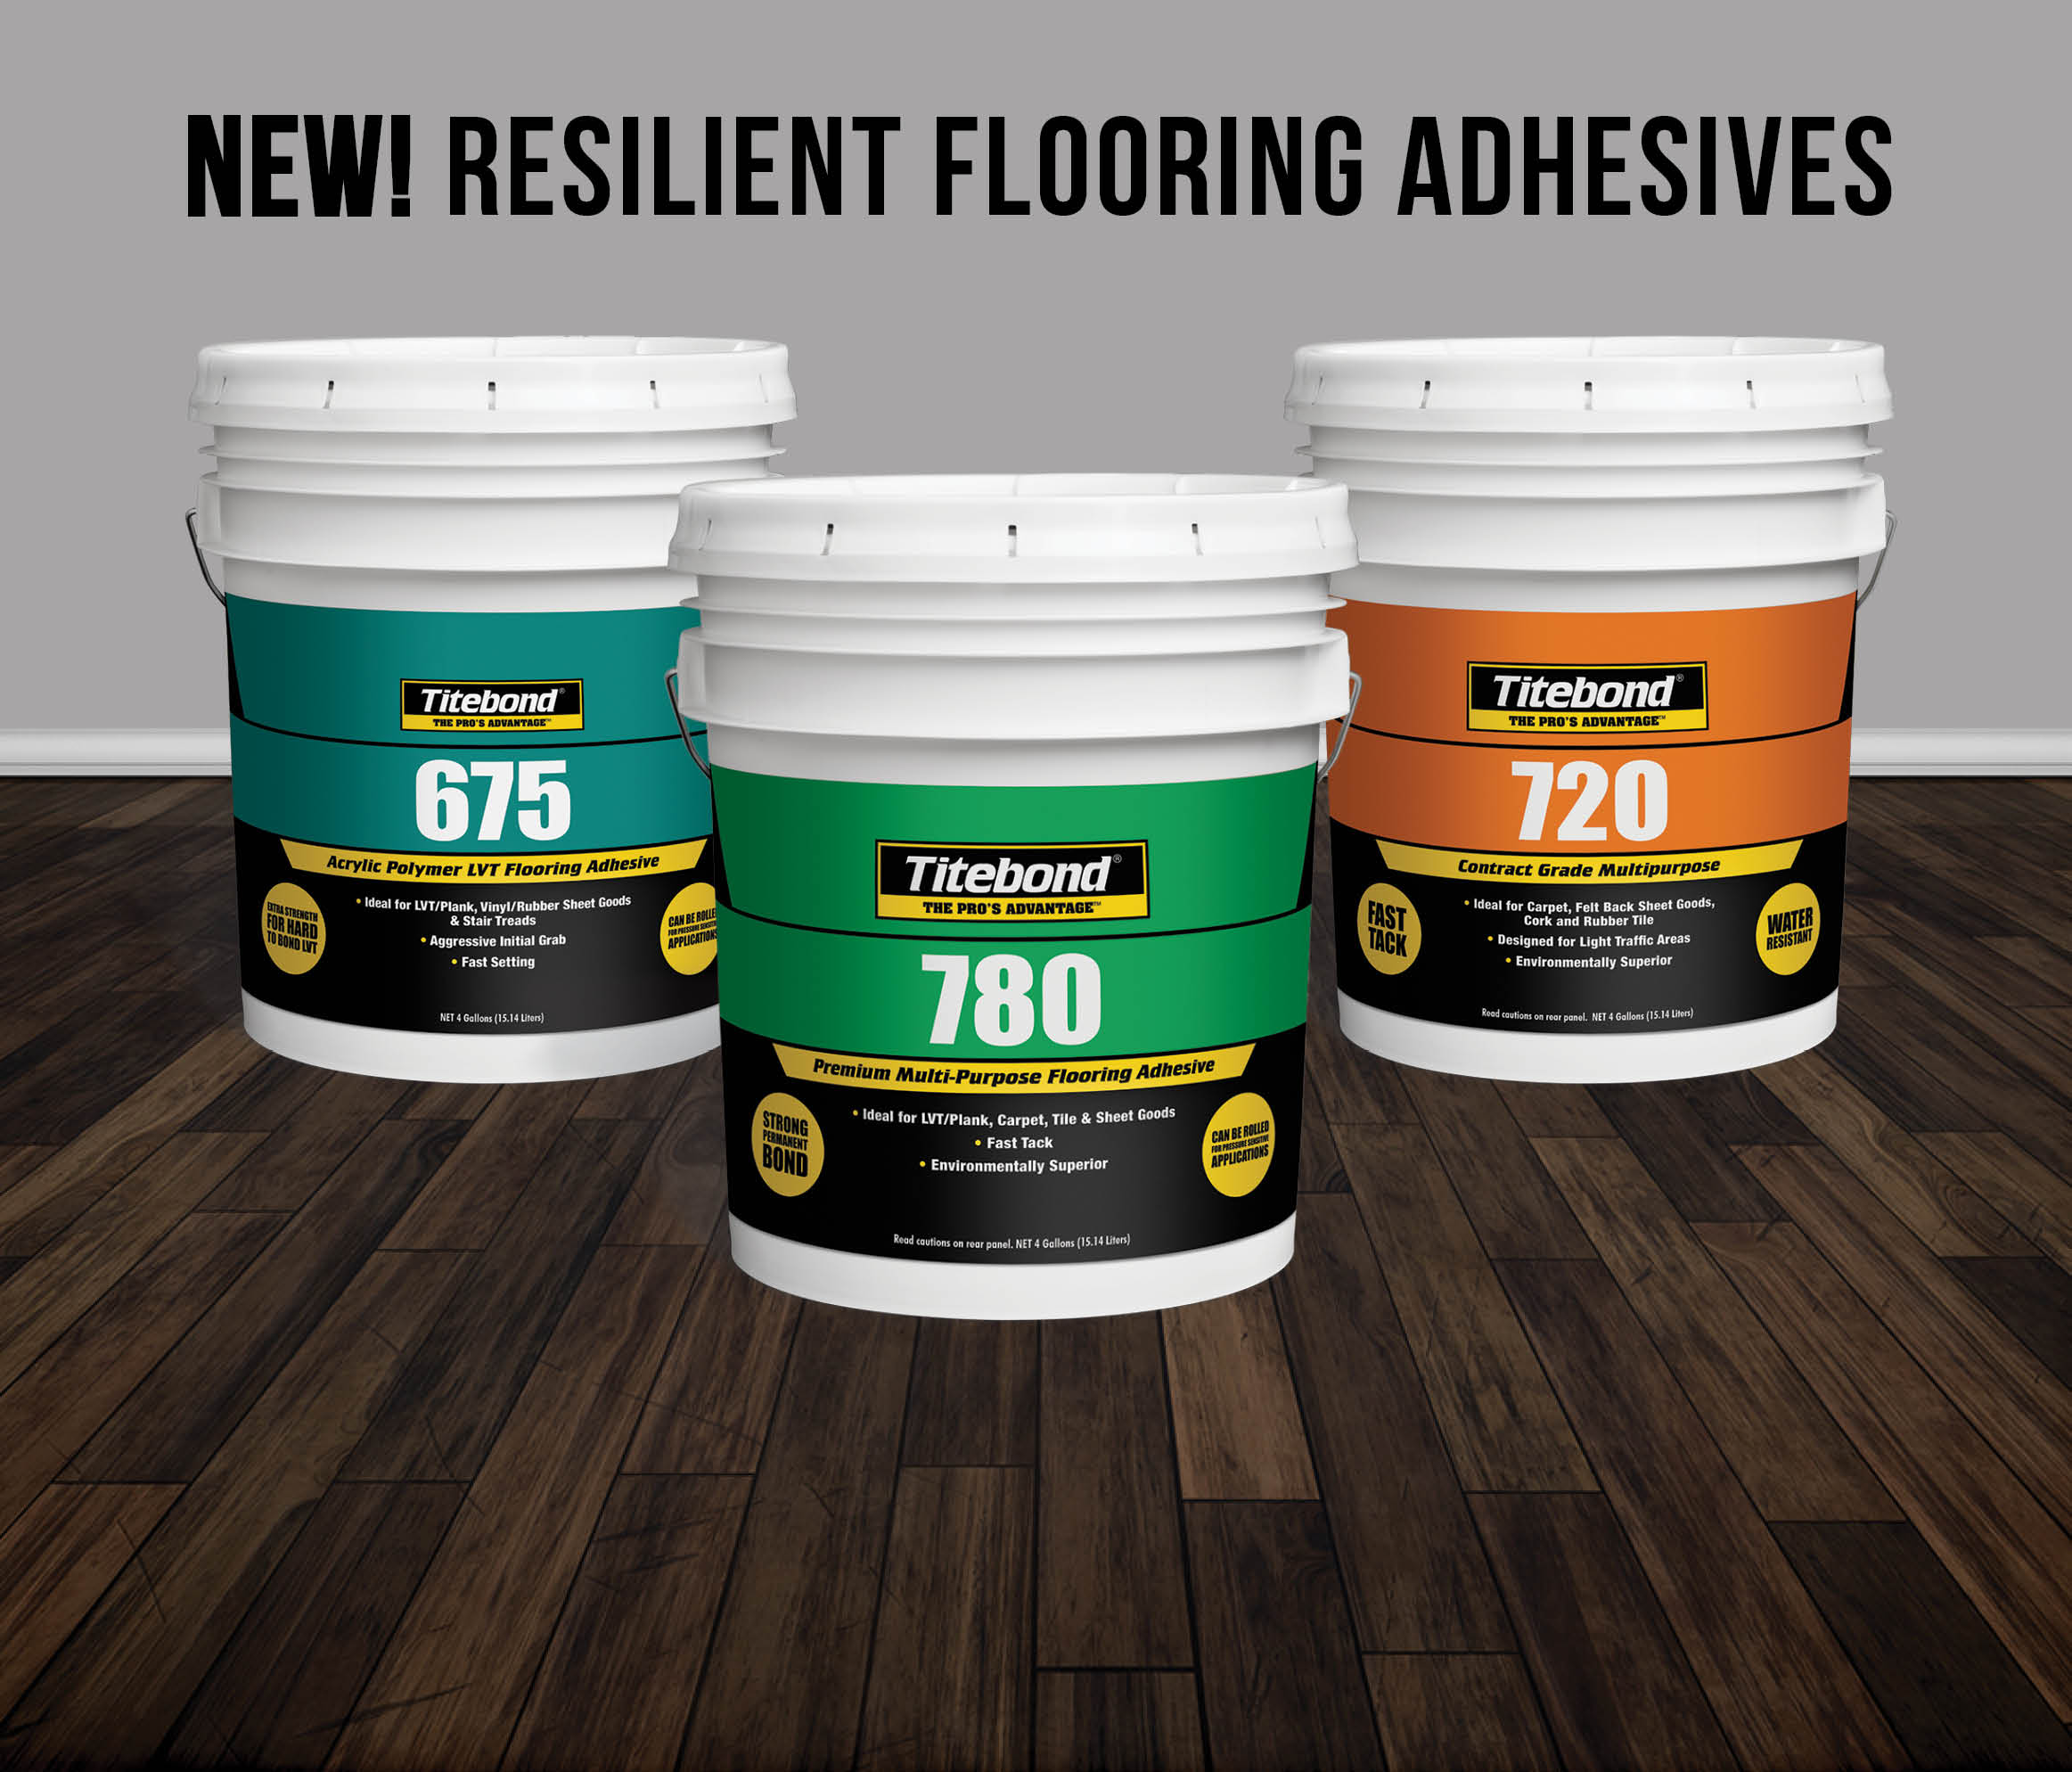 Titebond Offers the Right Flooring Adhesive to Install All Types of Resilient Flooring